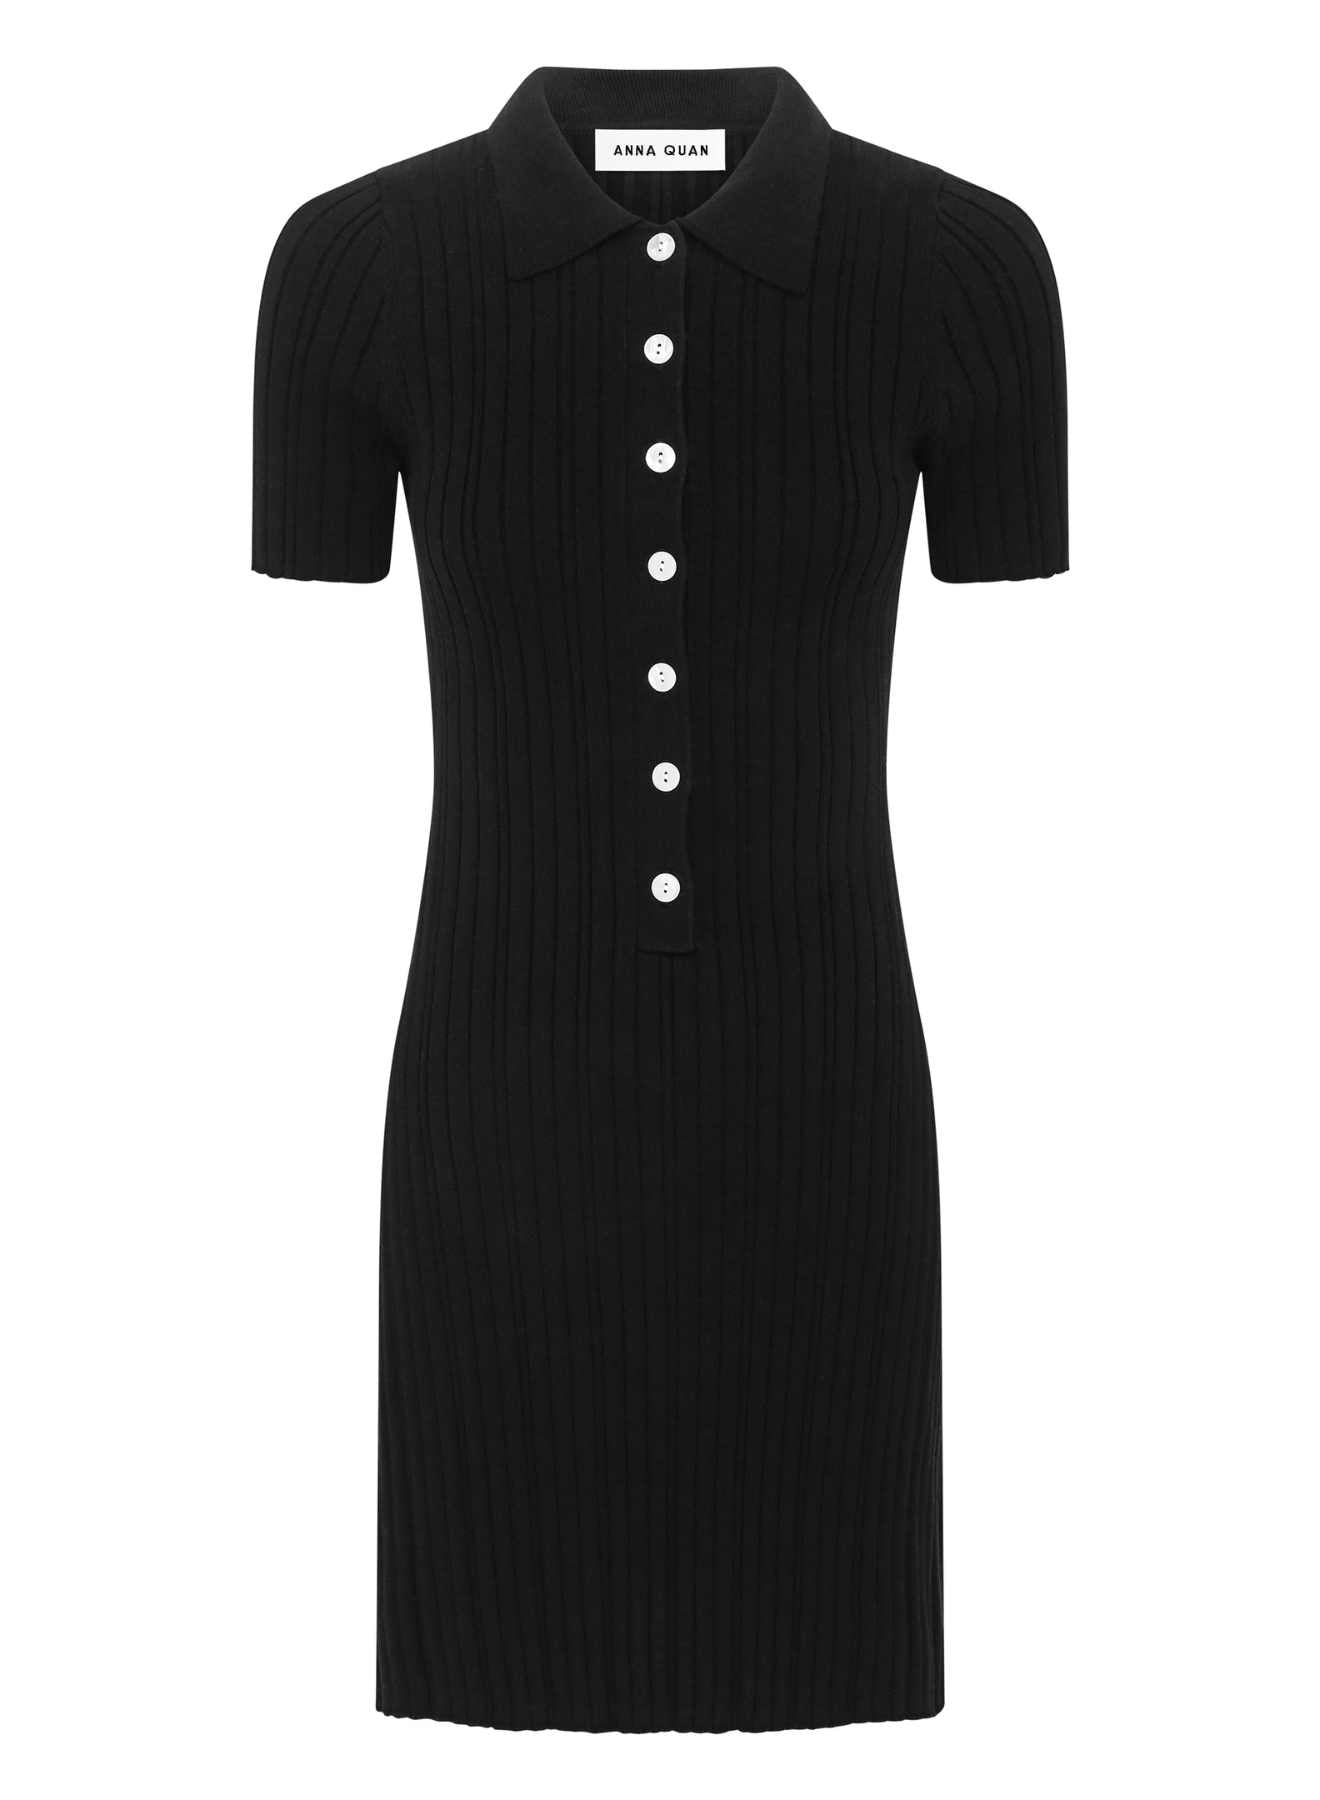 ANNA QUAN's Rib Knit Cotton Mini Dress features a chic polo neckline and contrasting buttons. Embrace versatility and comfort effortlessly with this best-selling piece, perfect for seamless transitions throughout the seasons. Day knit dress, day dress, everyday dress, work dress, short sleeve dress, short knit dress.